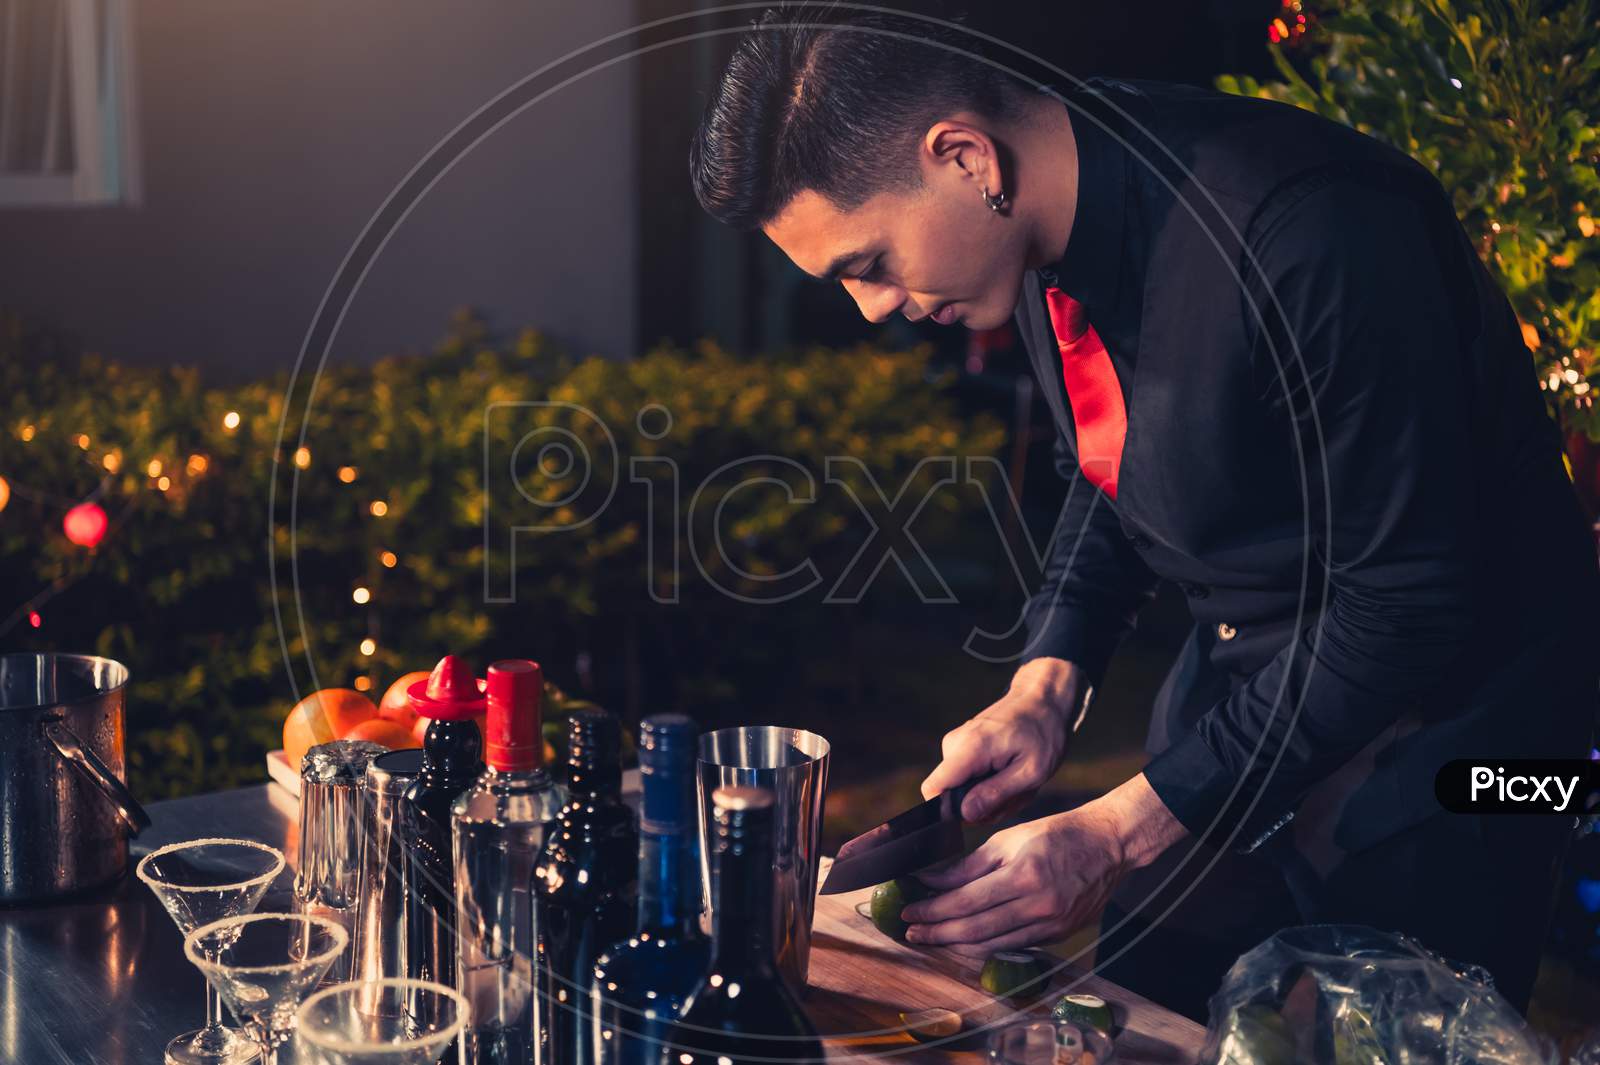 Professional Bartender Preparing Fresh Lime Lemonade Cocktail In Drinking Wine Glass With Ice At Night Bar Clubbing Counter. Occupation And People Lifestyles Concept. Outdoor Background